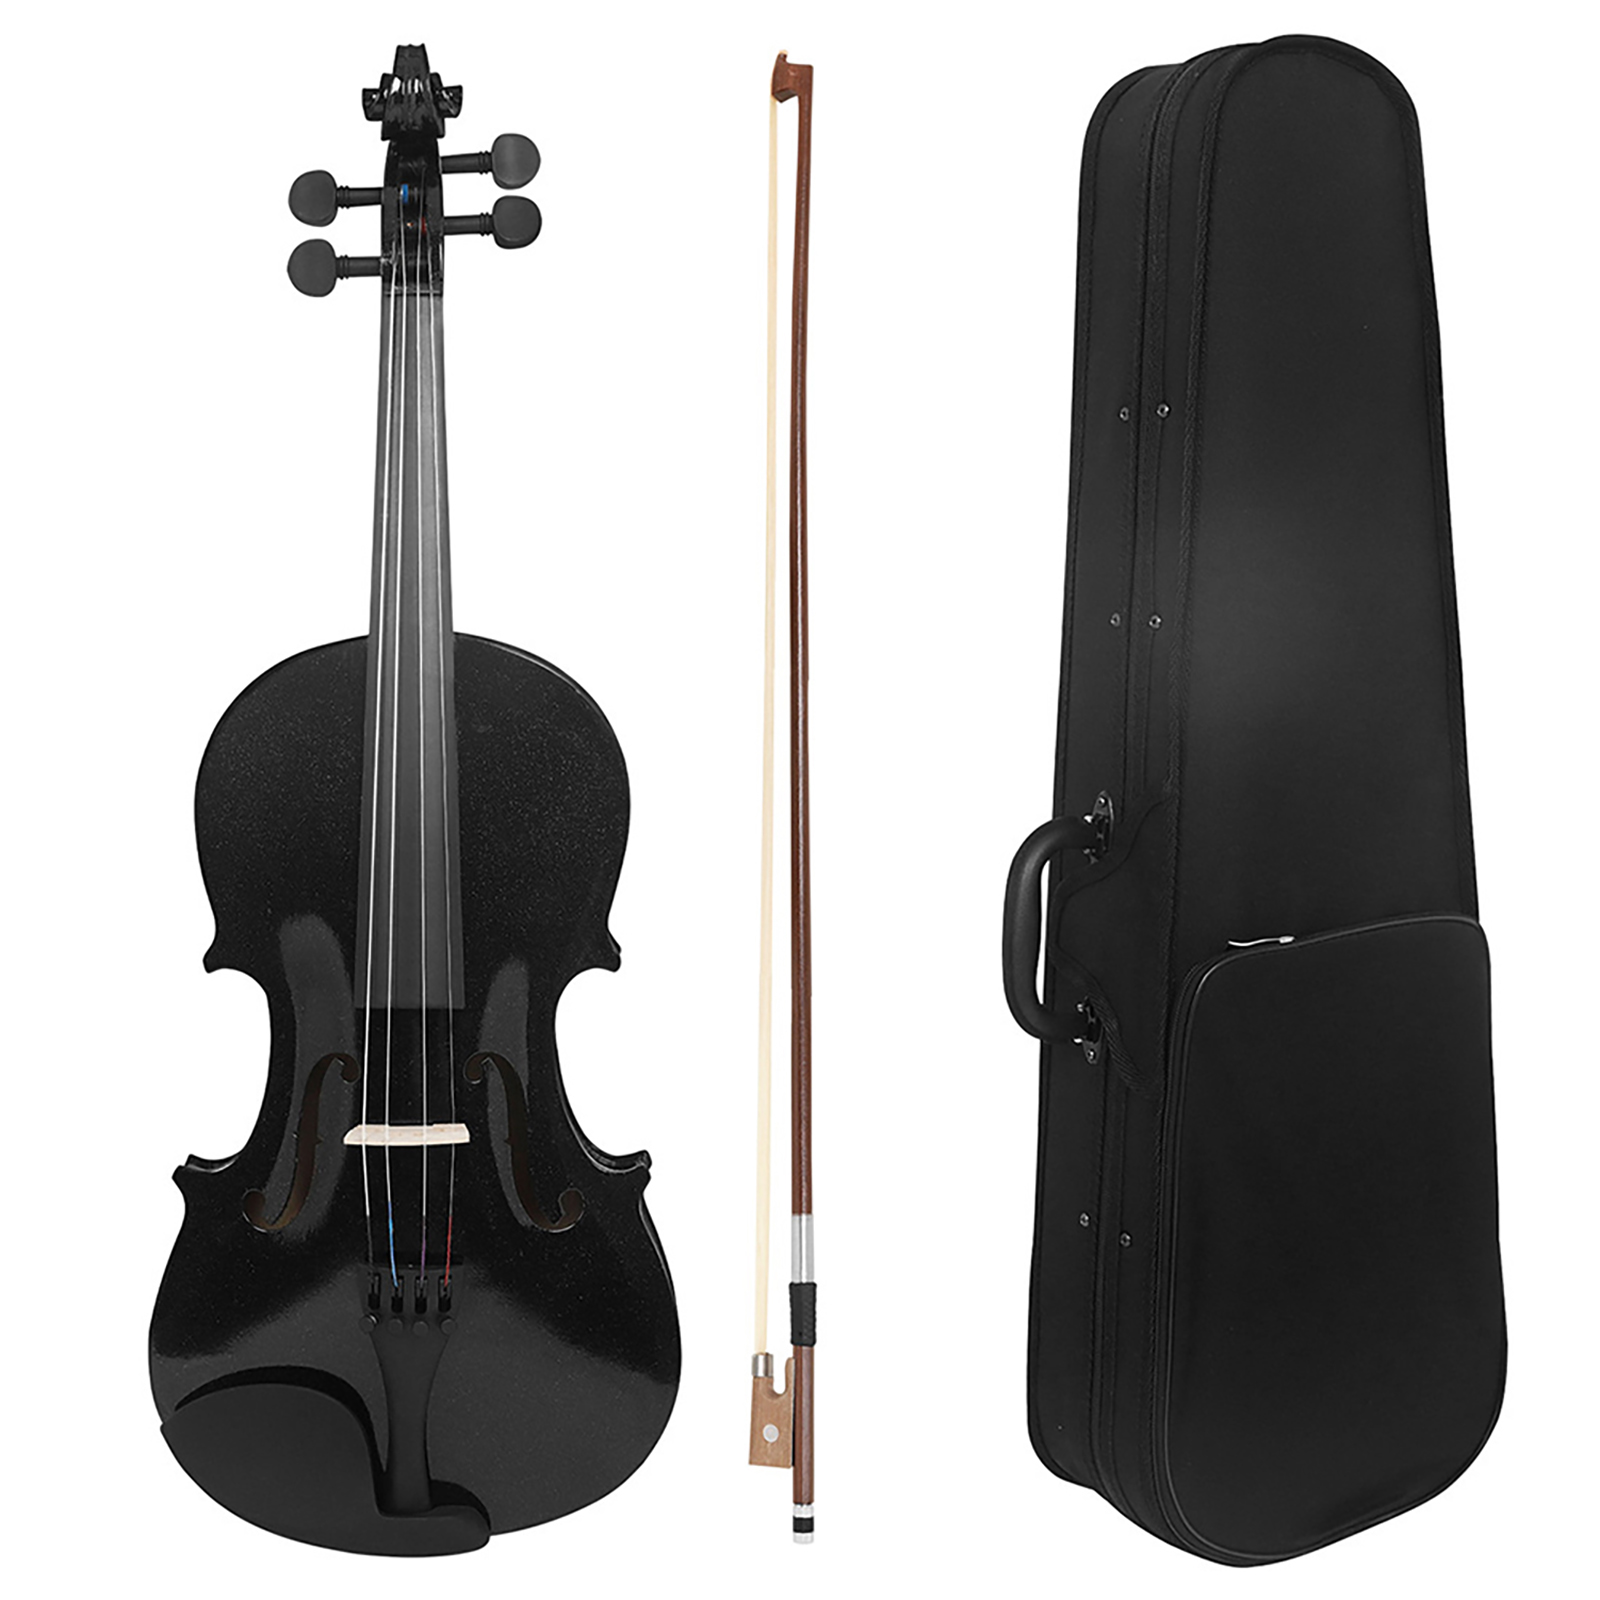 4/4 Violin Full Size With Carrying Case Bow Set Musical Instrument Beginners Kit Gift For Kids Students Learners